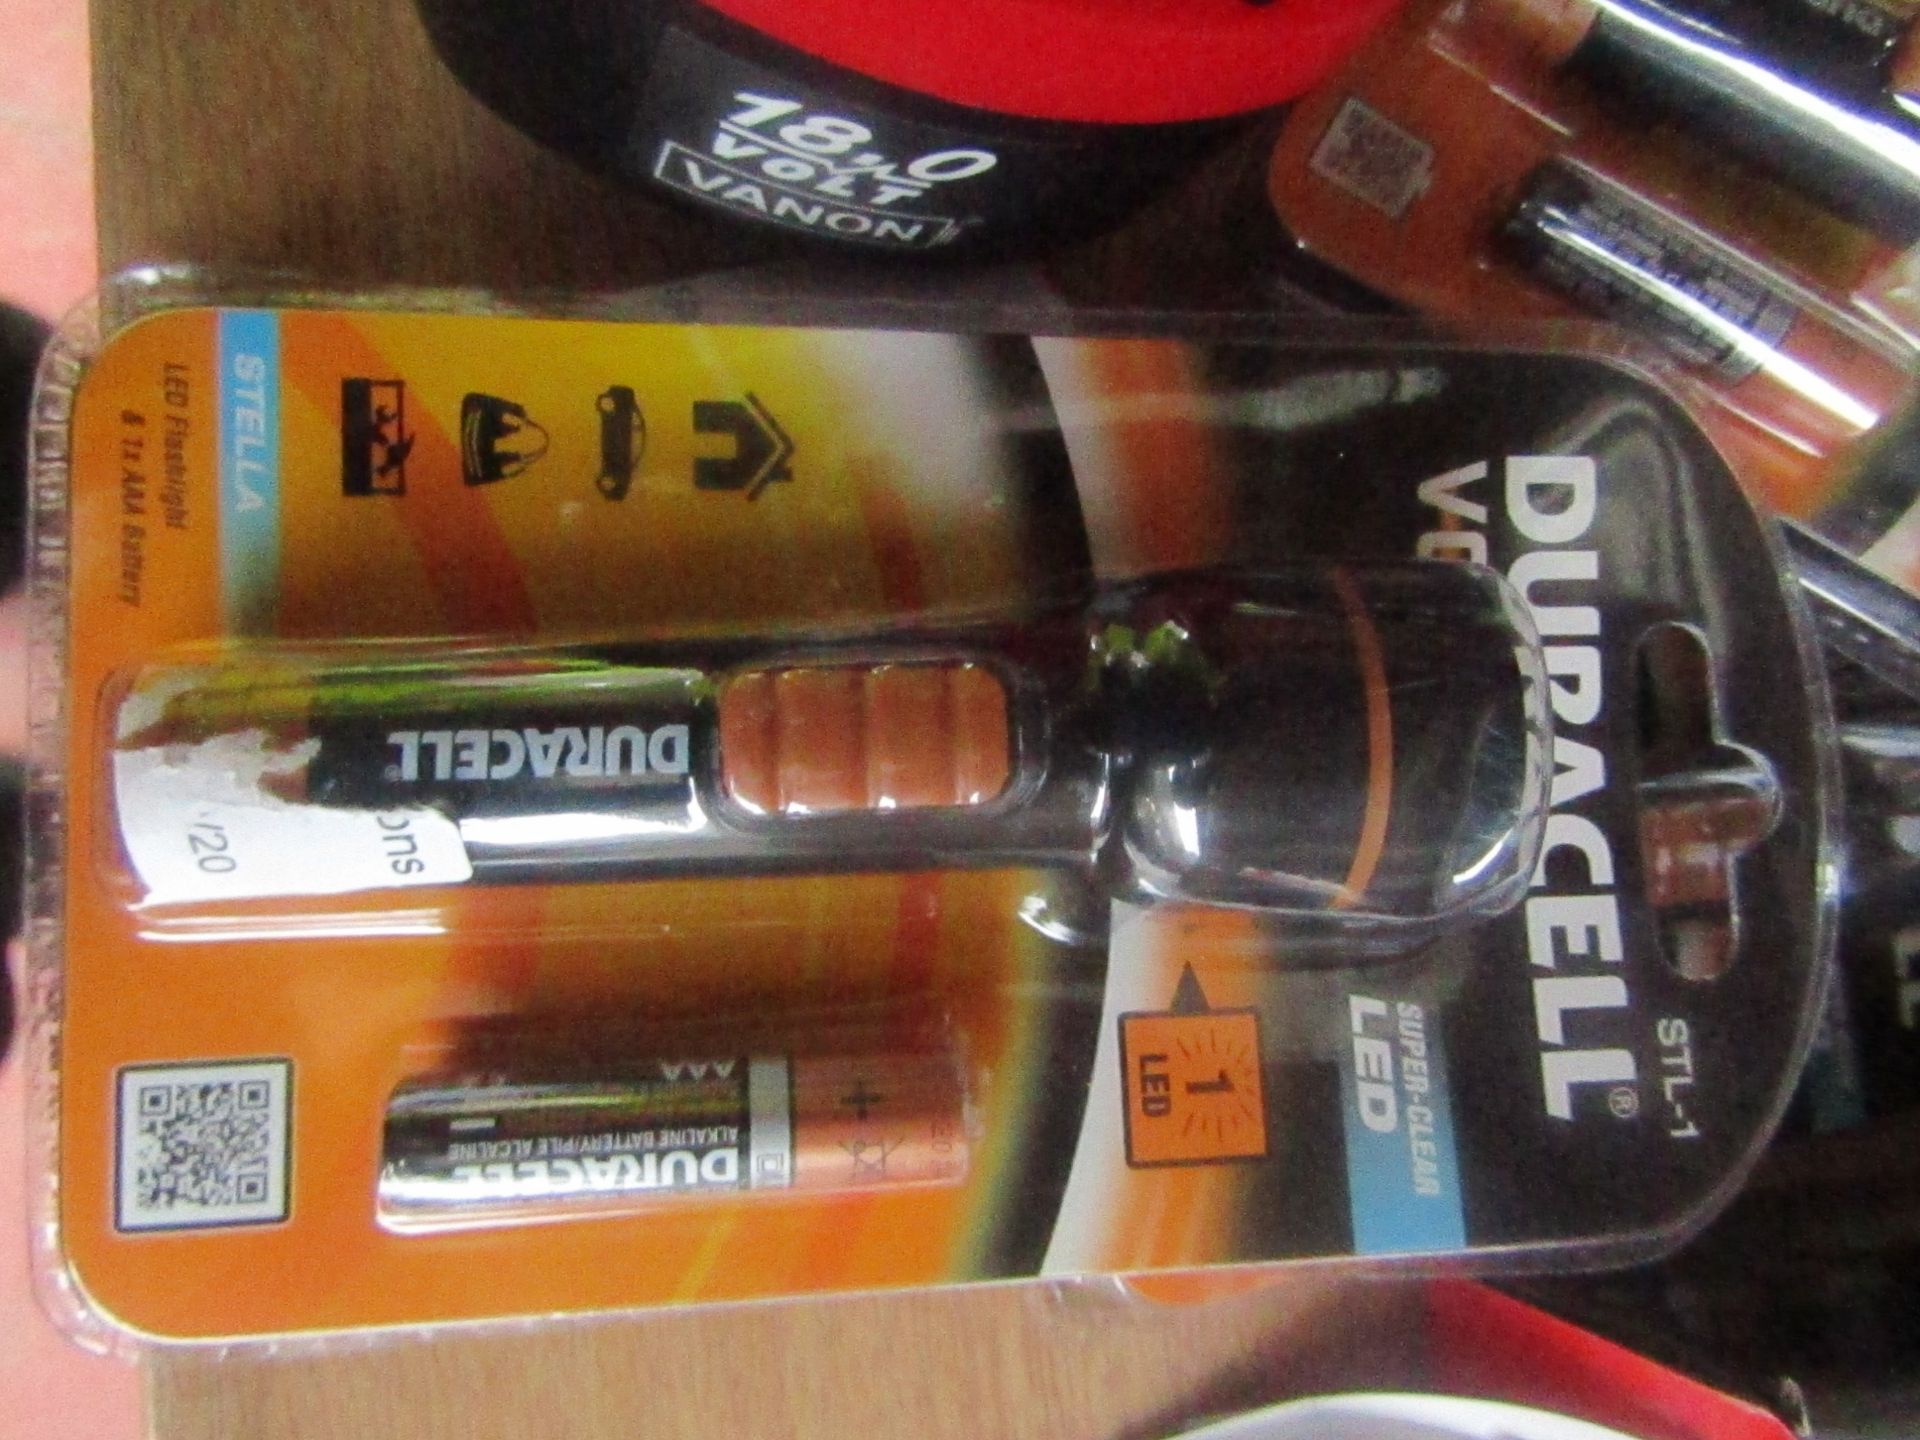 Duracell - Voyager Super Clear LED Flashlight - New & Packaged.